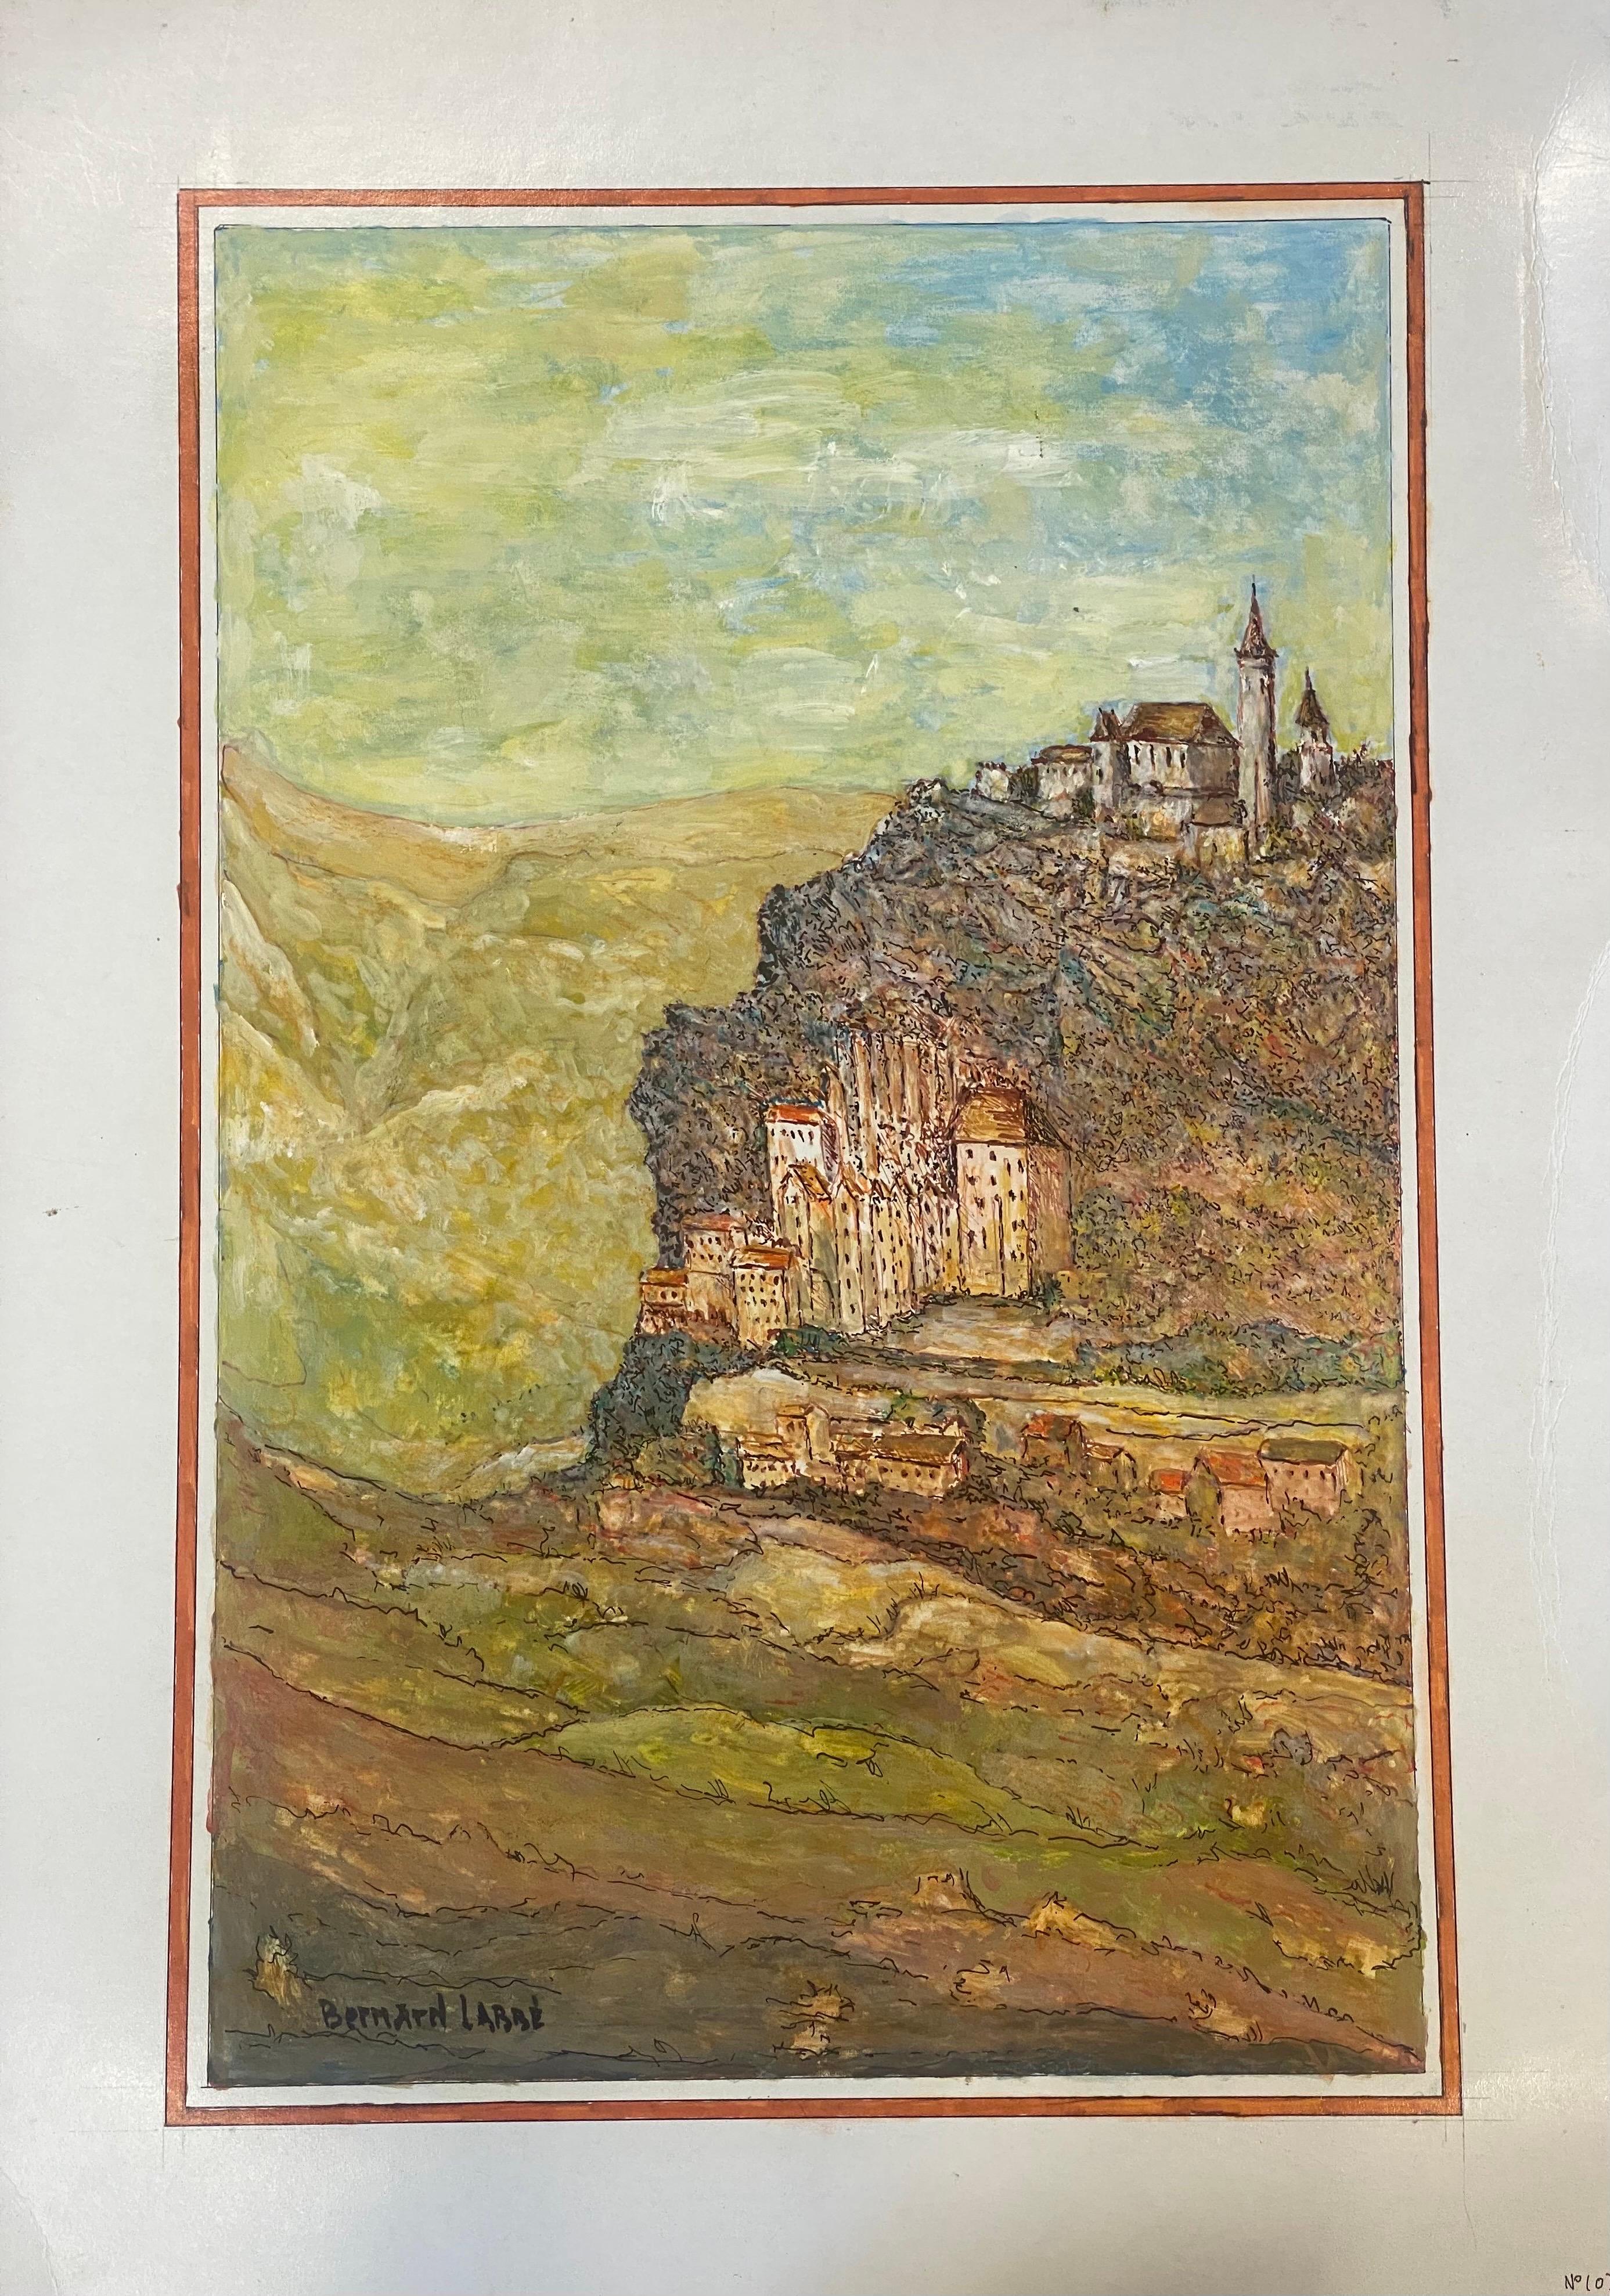 French Landscape
by Bernard Labbe (French mid 20th century)
signed original watercolour/ gouache painting on thin paper
size: 22.5 x 16 inches
condition: very good and ready to be enjoyed. 

provenance: the artists atelier/ studio, France